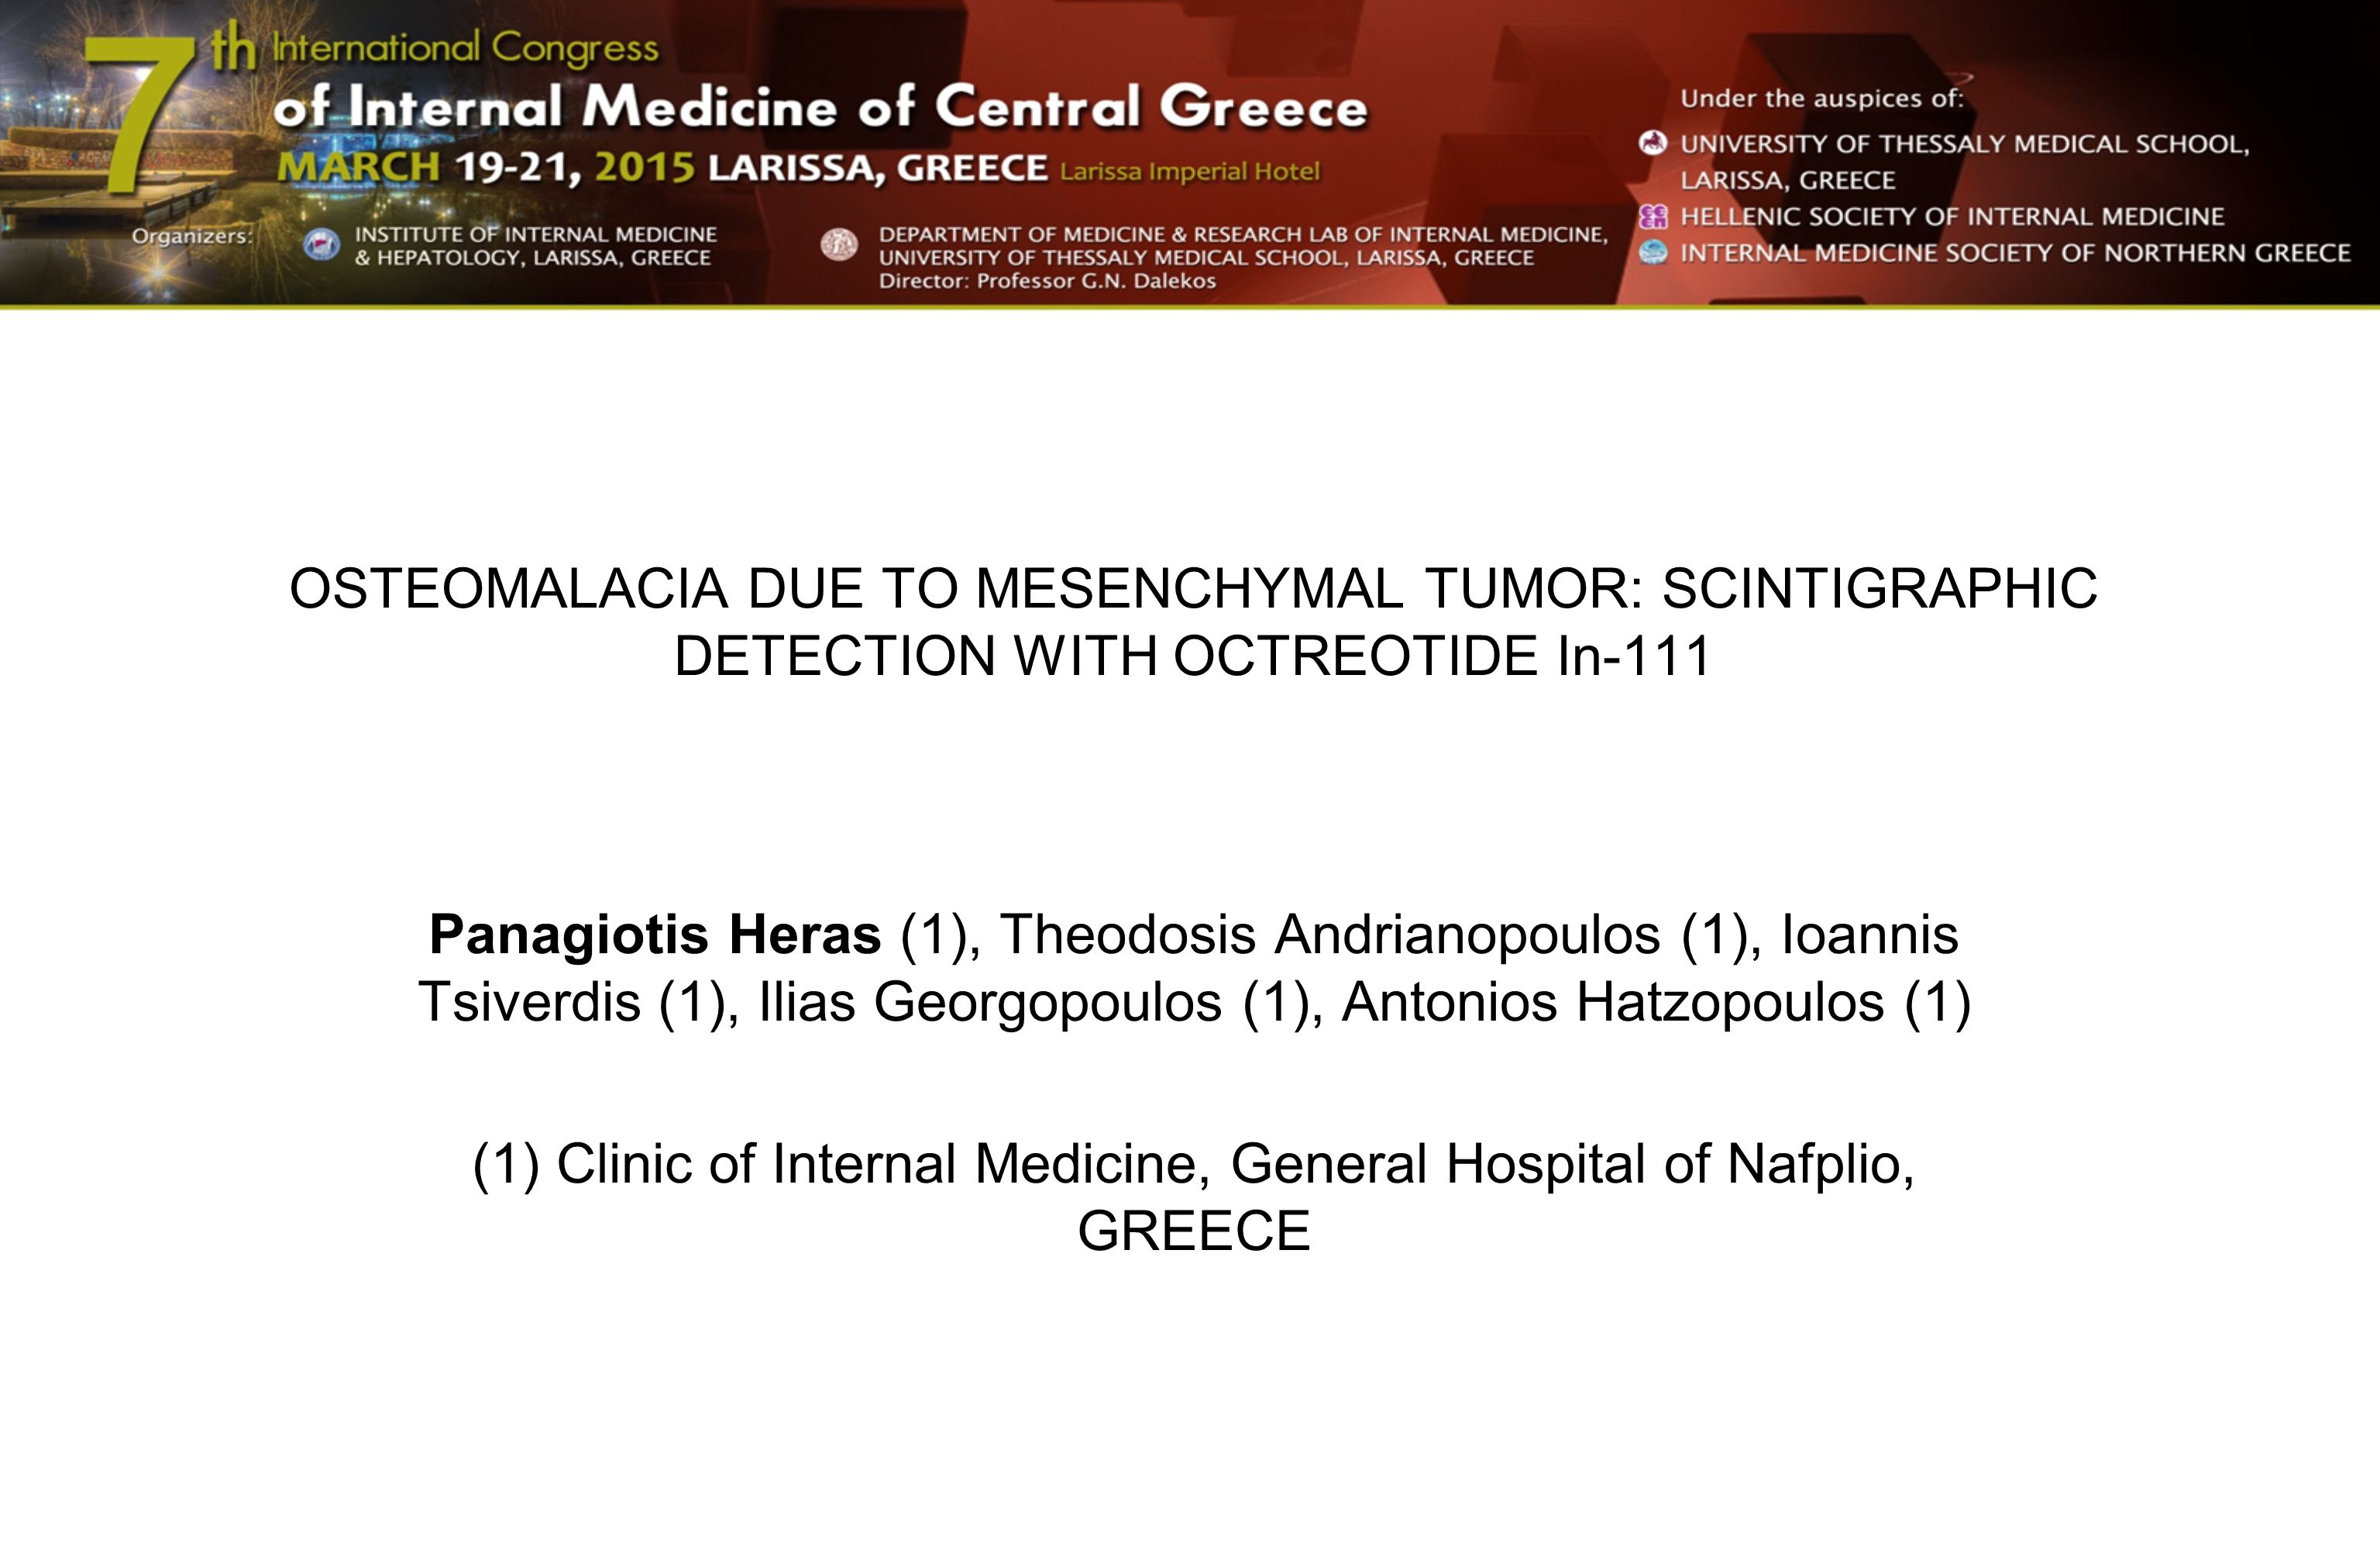 OSTEOMALACIA DUE TO MESENCHYMAL TUMOR: SCINTIGRAPHIC DETECTION WITH  OCTREOTIDE In-111 Panagiotis Heras (1), Theodosis Andrianopoulos (1),  Ioannis Tsiverdis. - ppt download